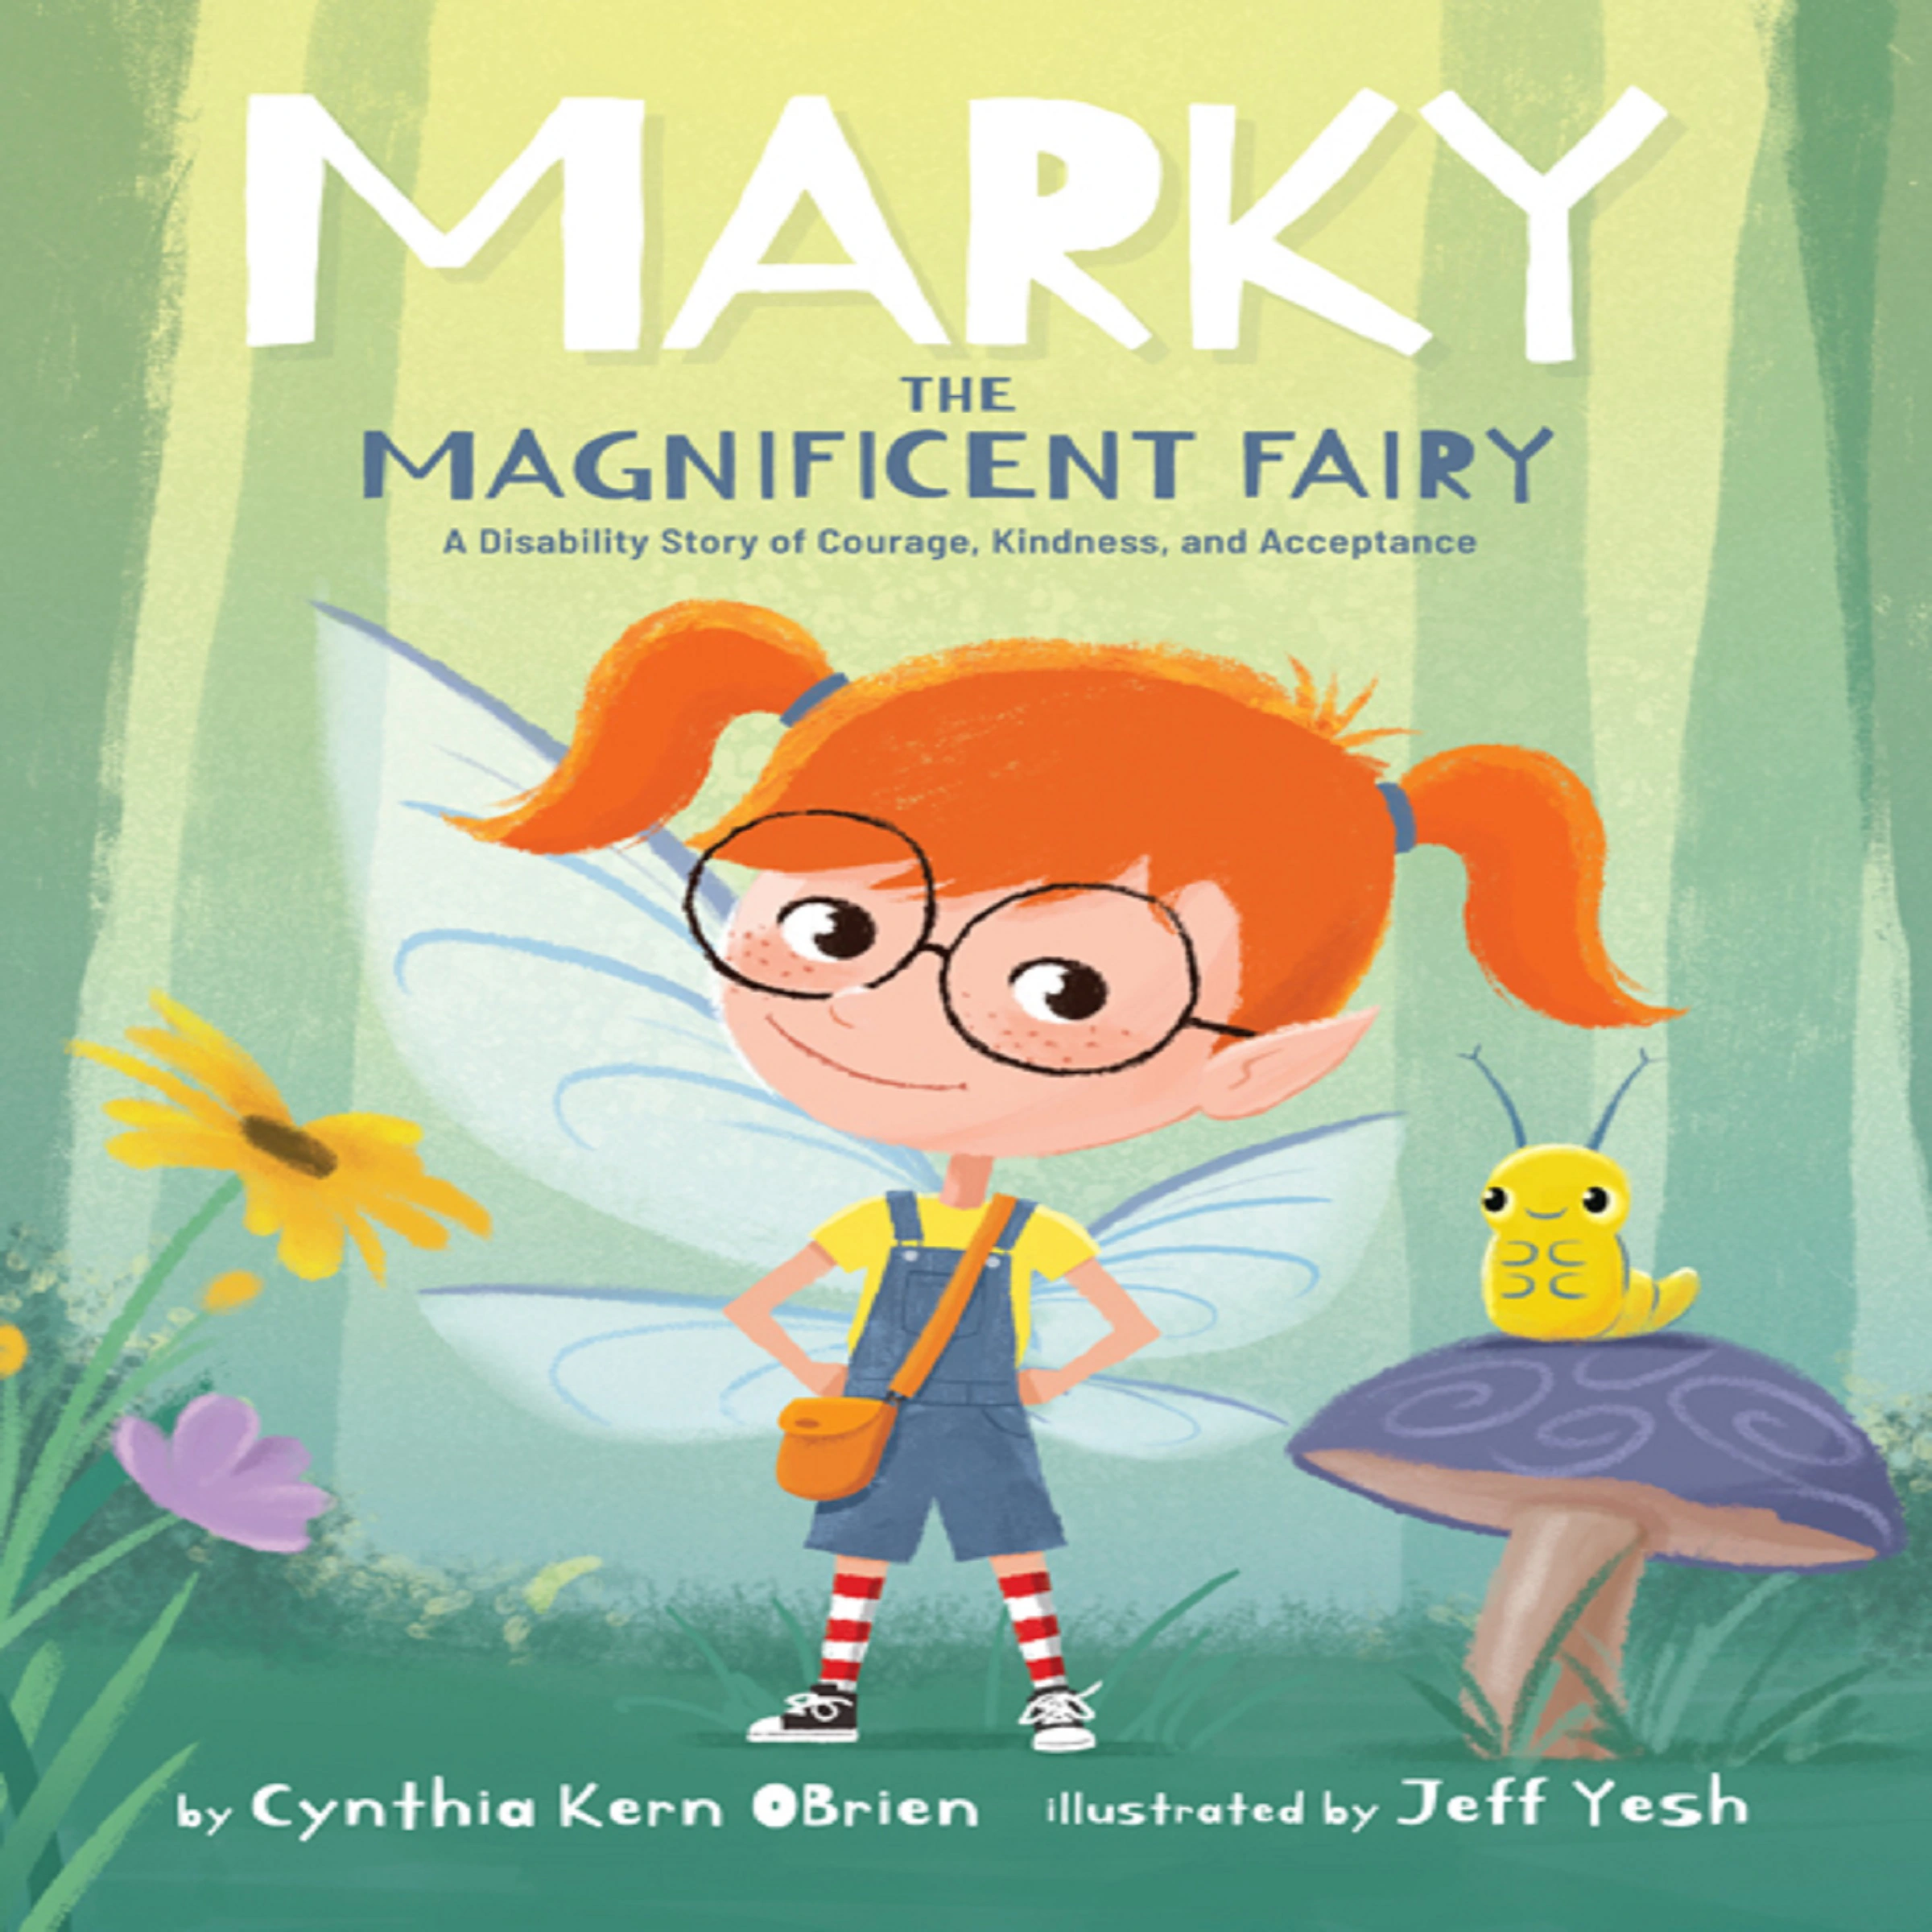 Marky the Magnificent Fairy: A Disability Story of Courage, Kindness, and Acceptance by Cynthia Kern Obrien Audiobook